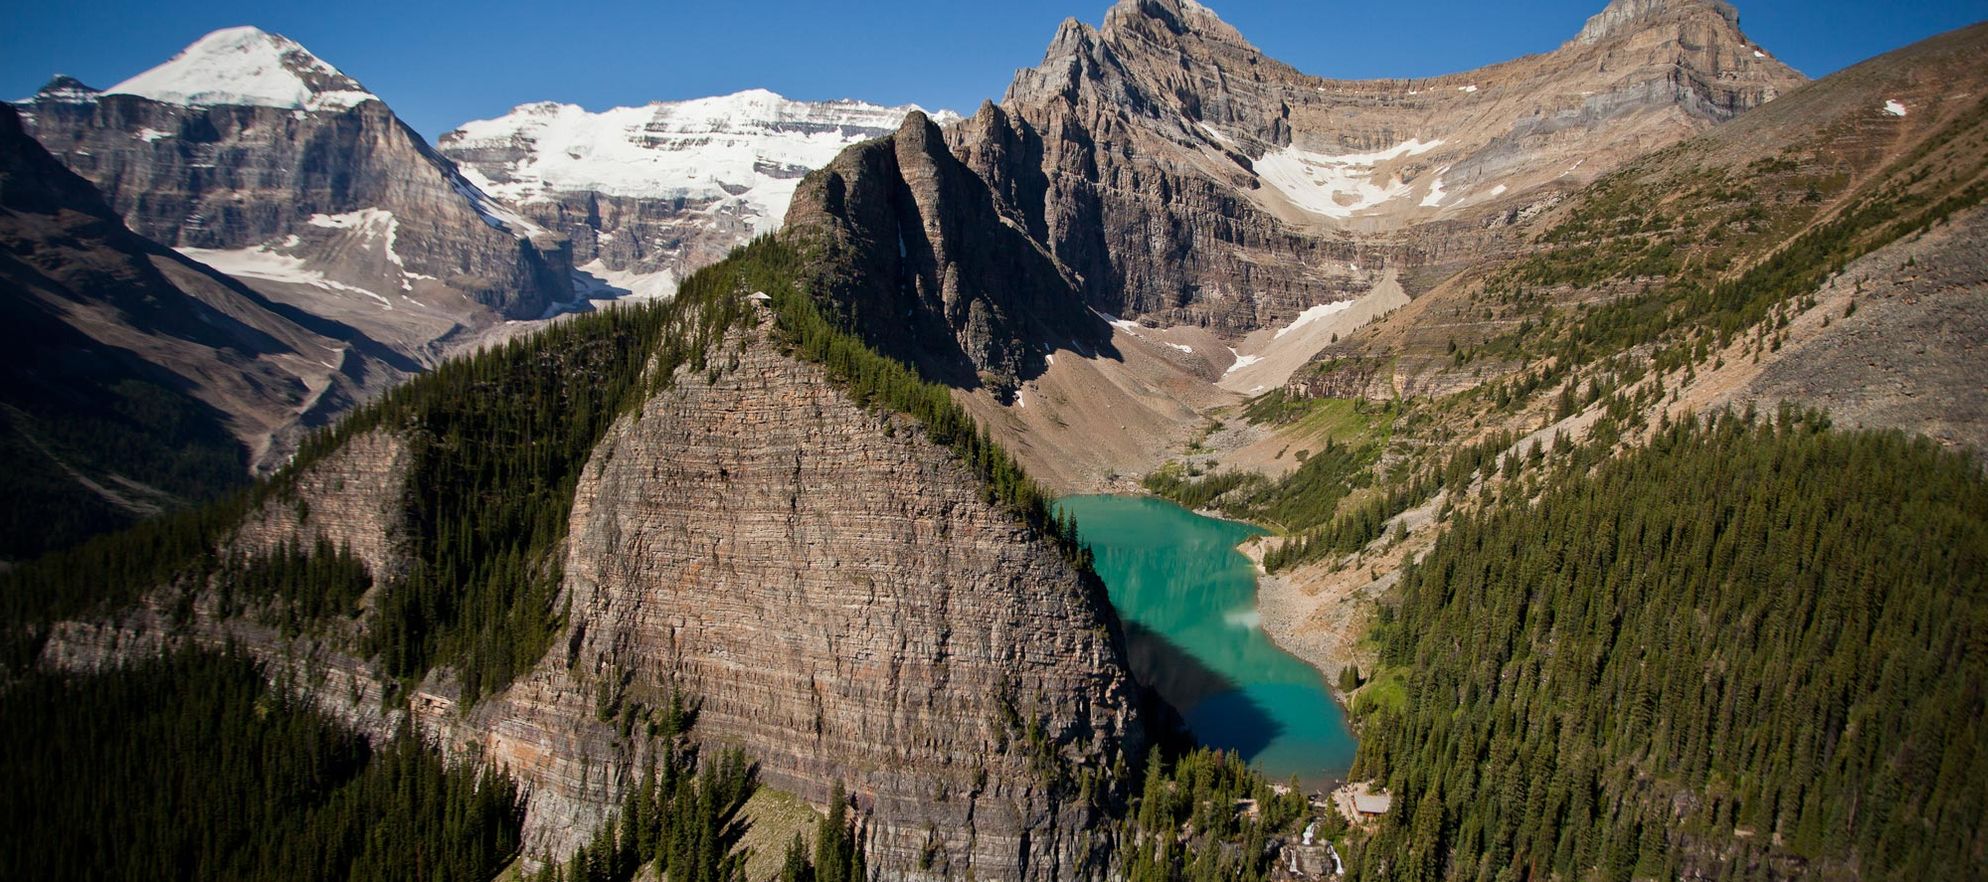 Hiking in Banff and Lake Louise